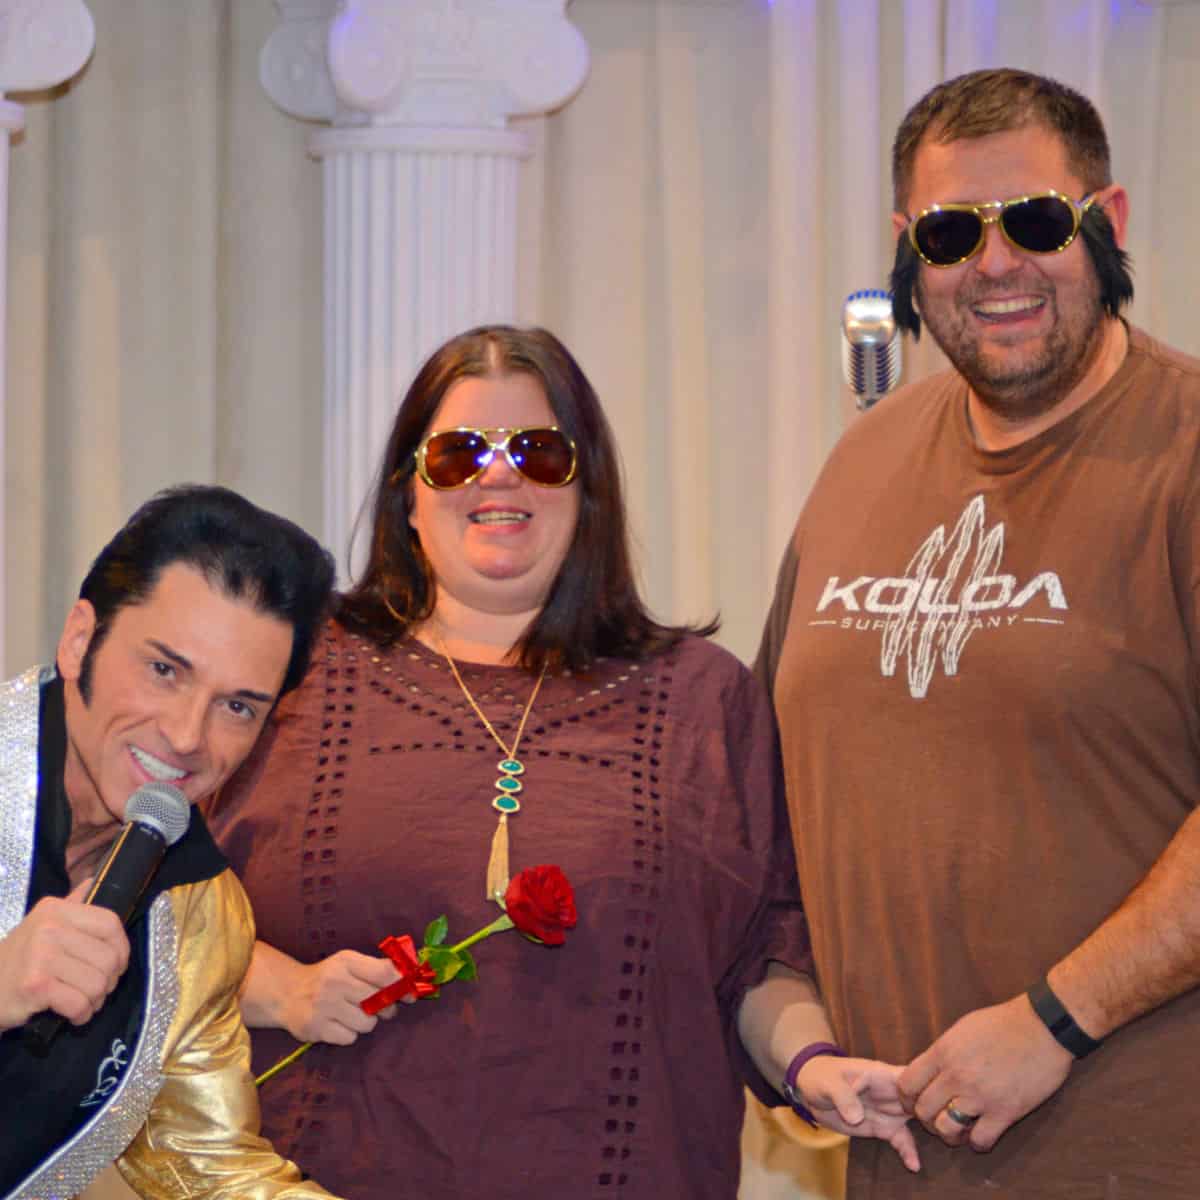 John and tammilee with an Elvis impersonator